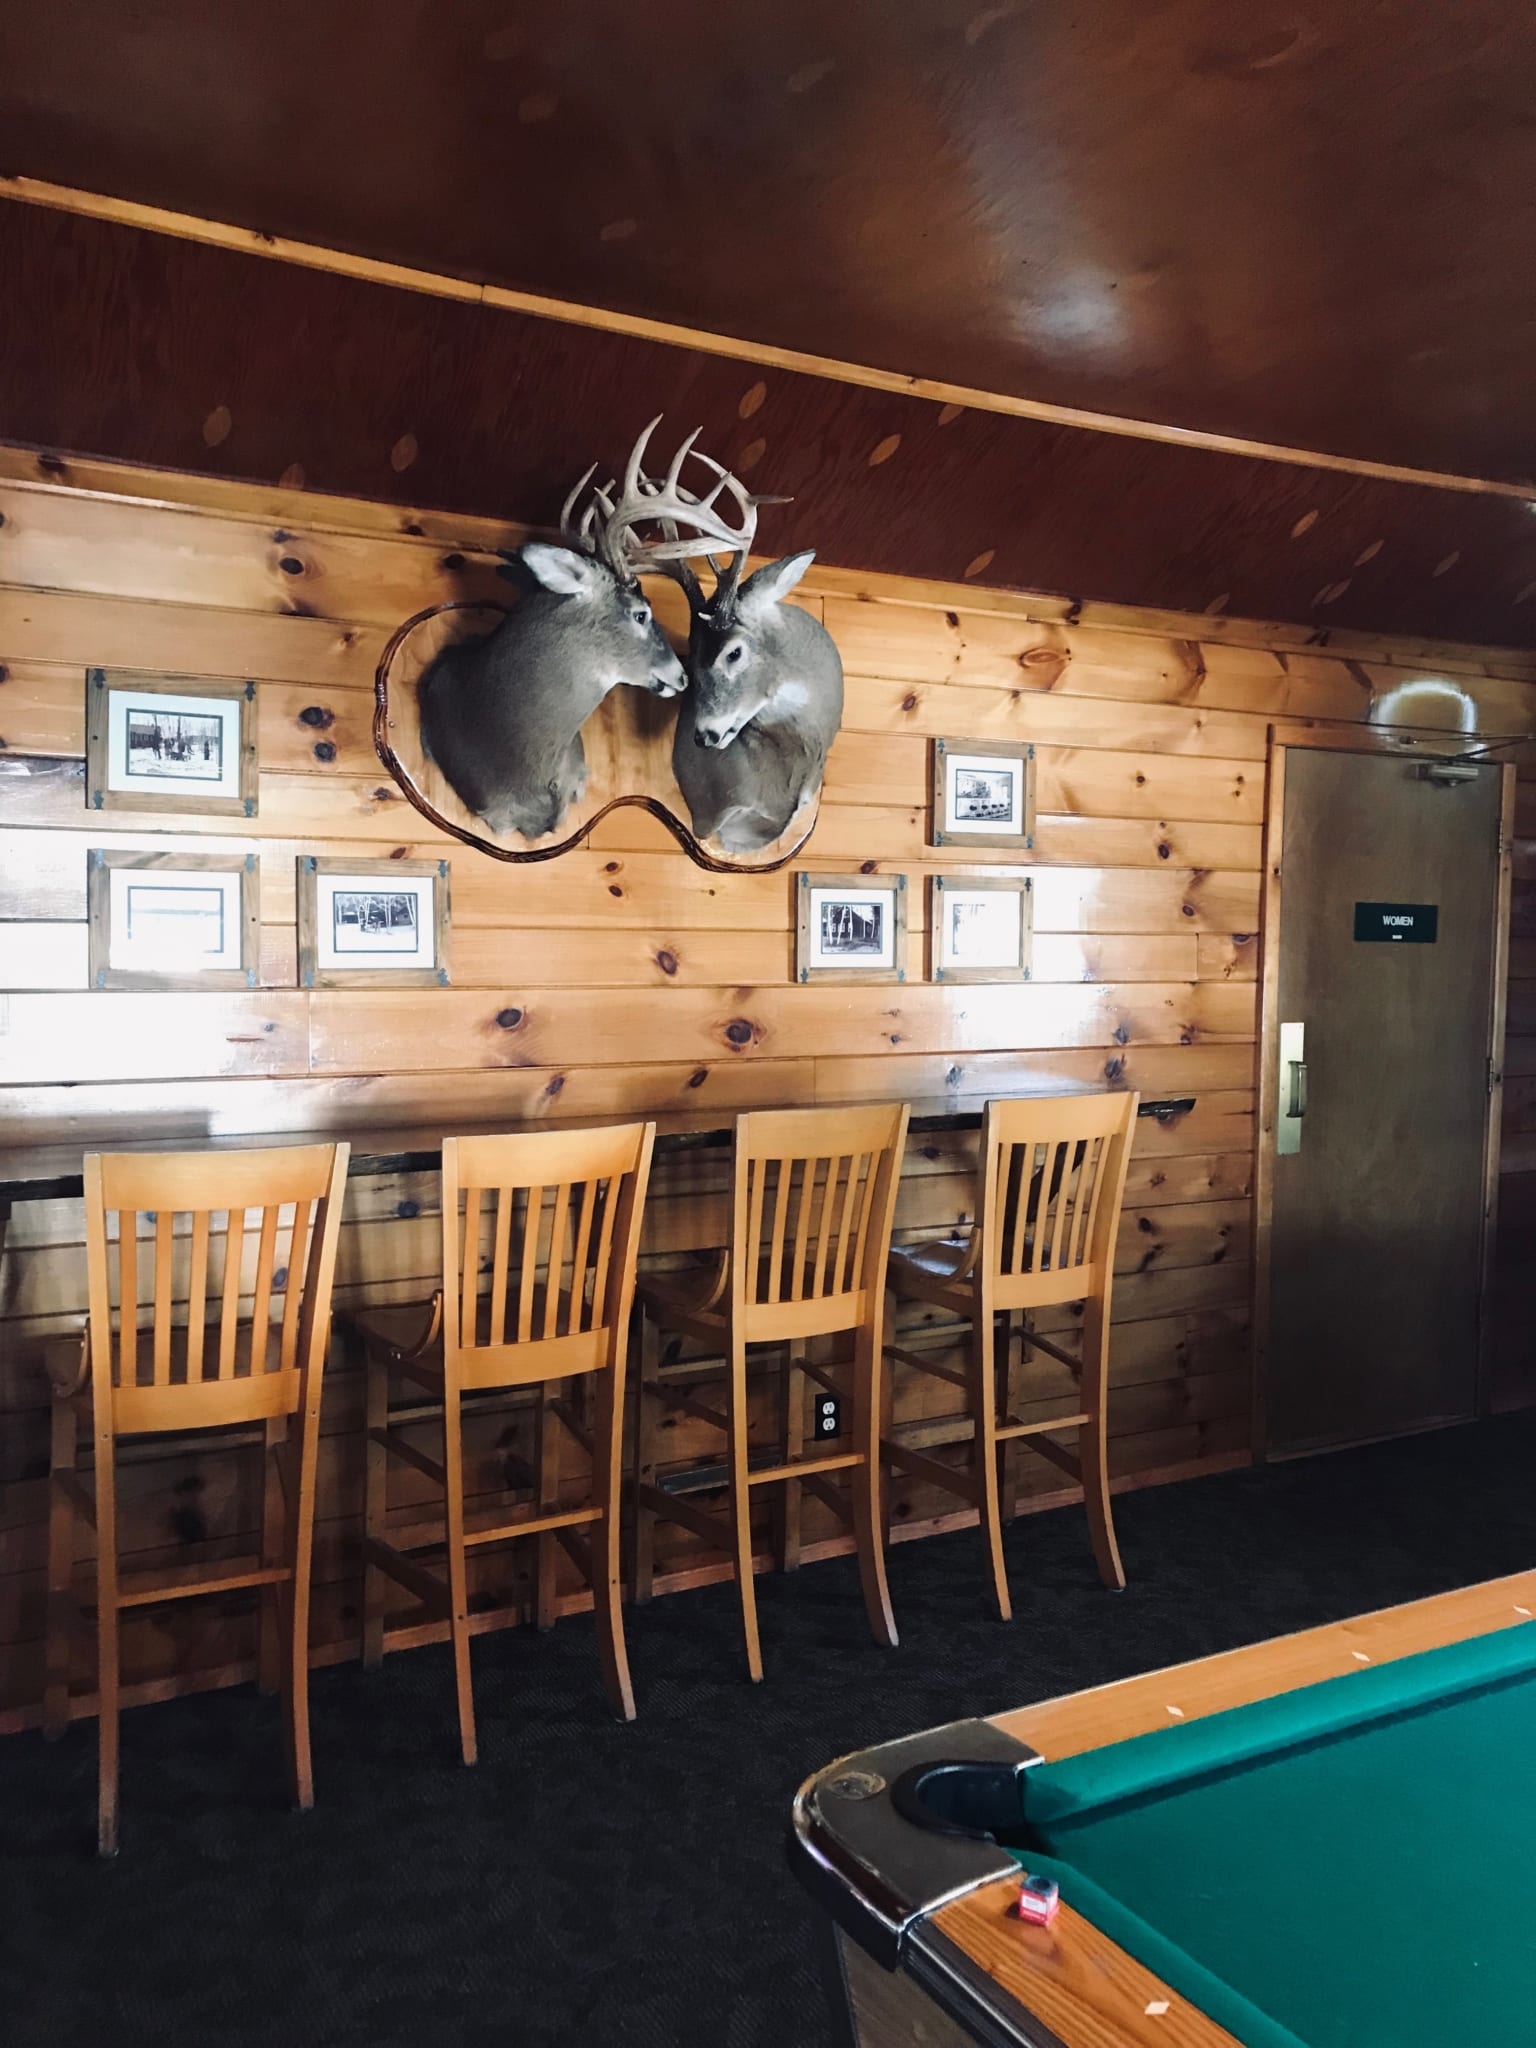 Taproom mounted deer and pool table.